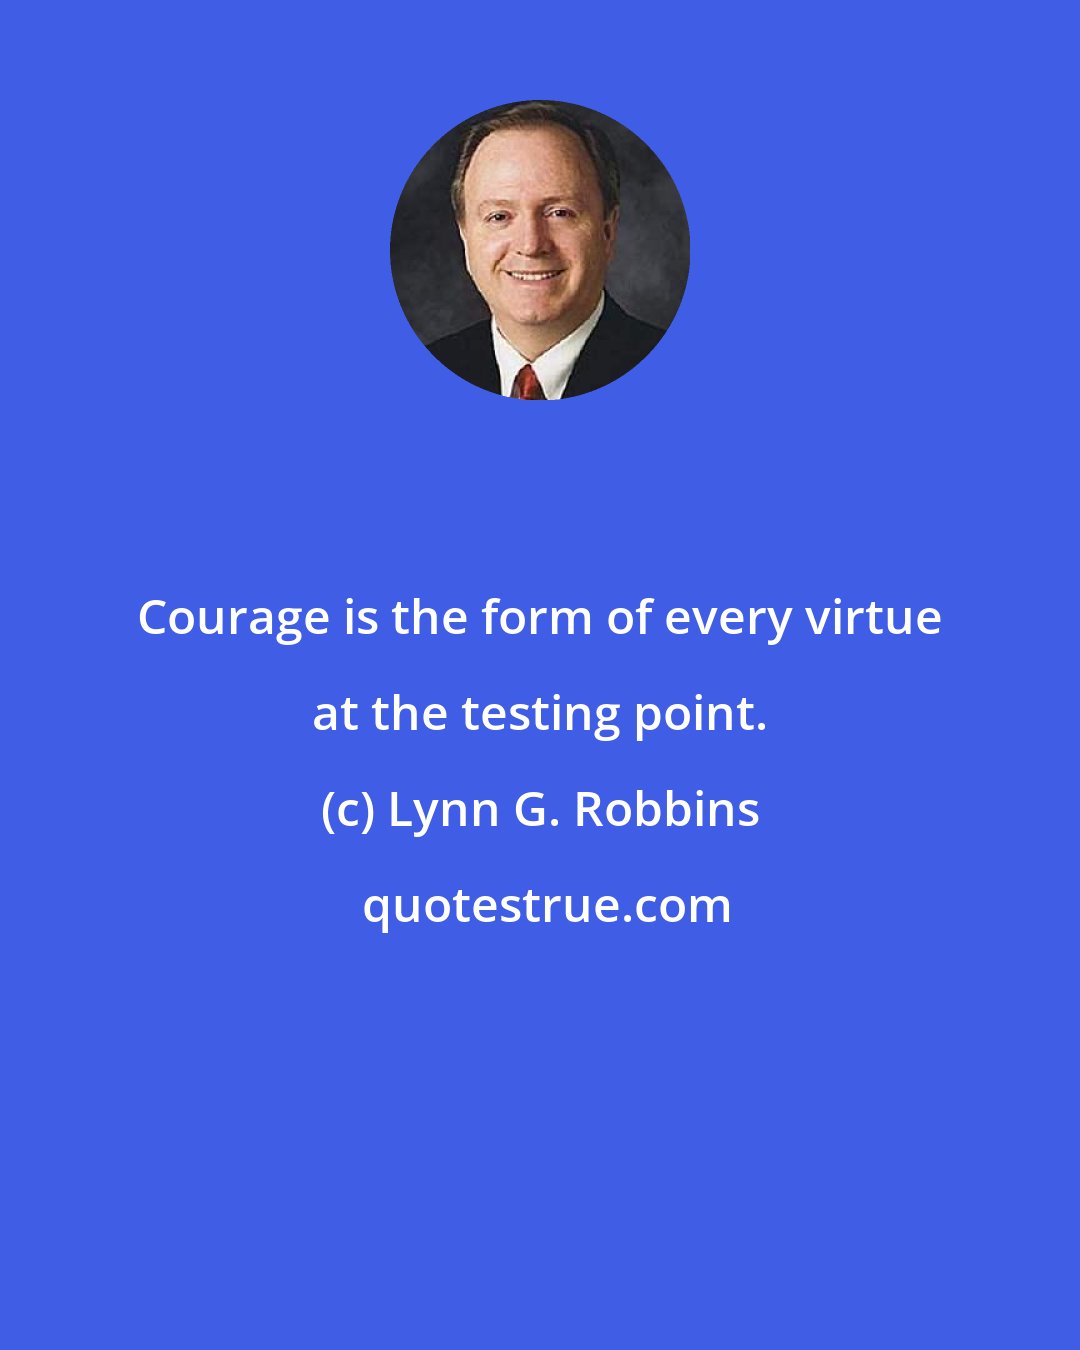 Lynn G. Robbins: Courage is the form of every virtue at the testing point.